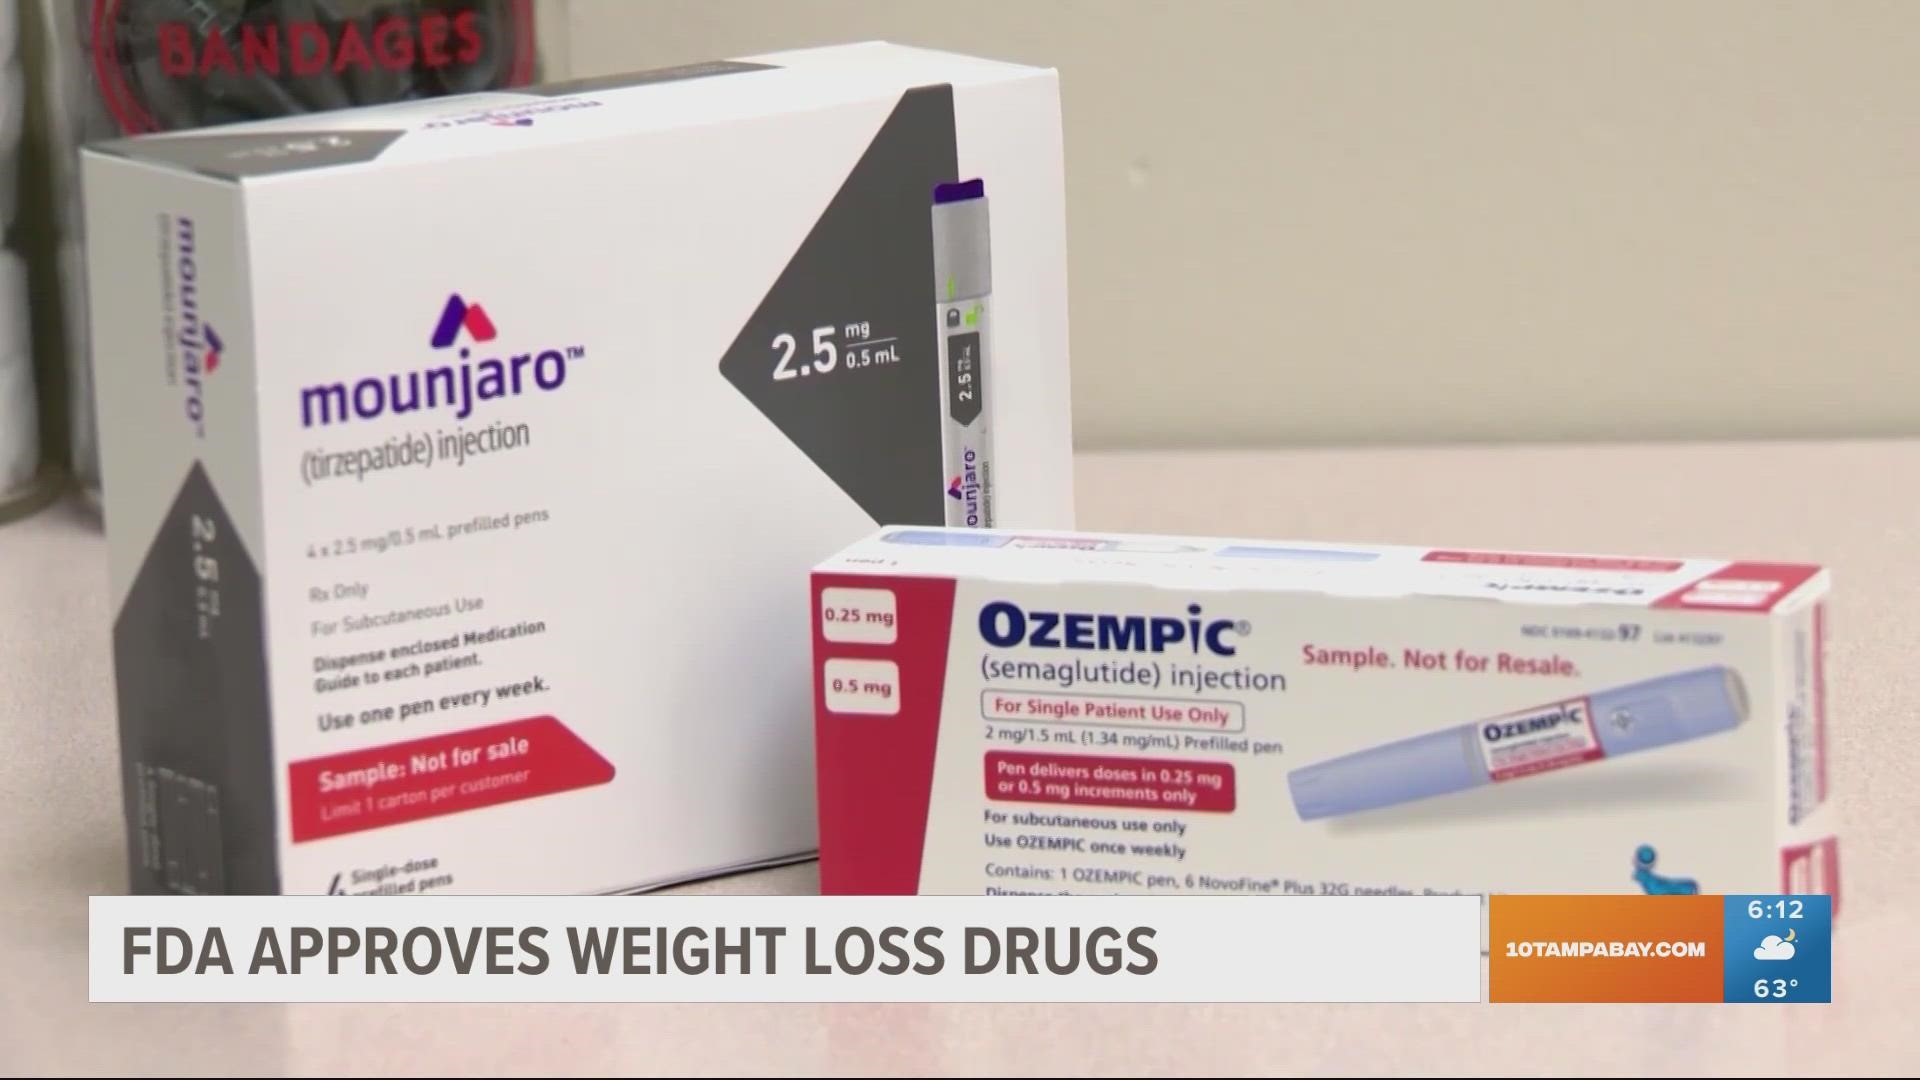 Is Ozempic a Safe Weight Loss Drug? - FMC